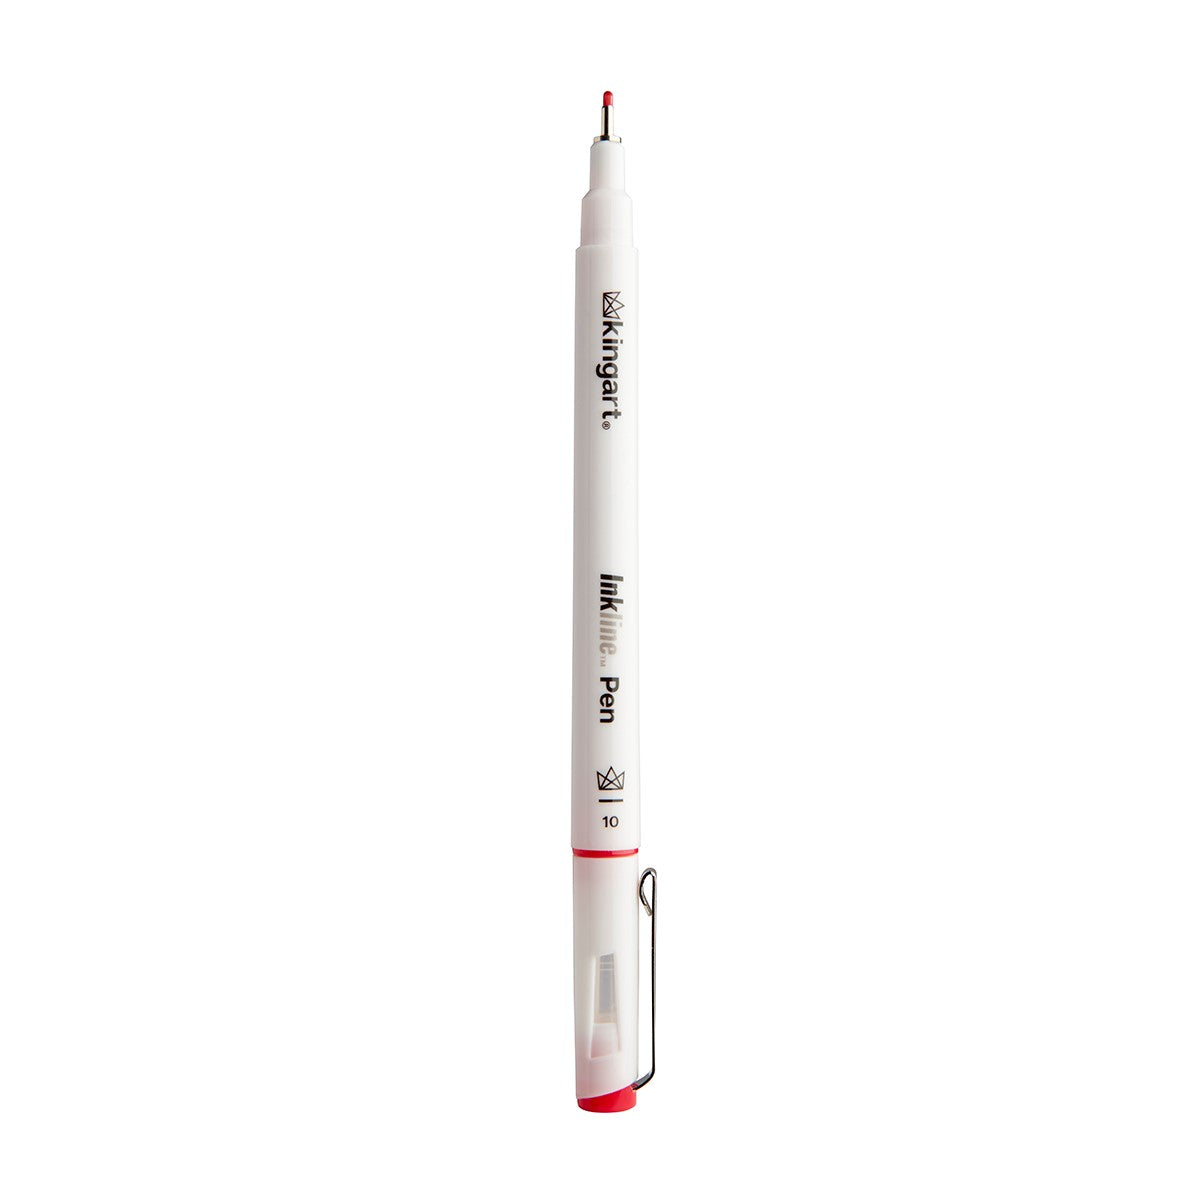 Uni PIN 04 Fine Liner Drawing Pen 0.4mm - Sharpies, Liners